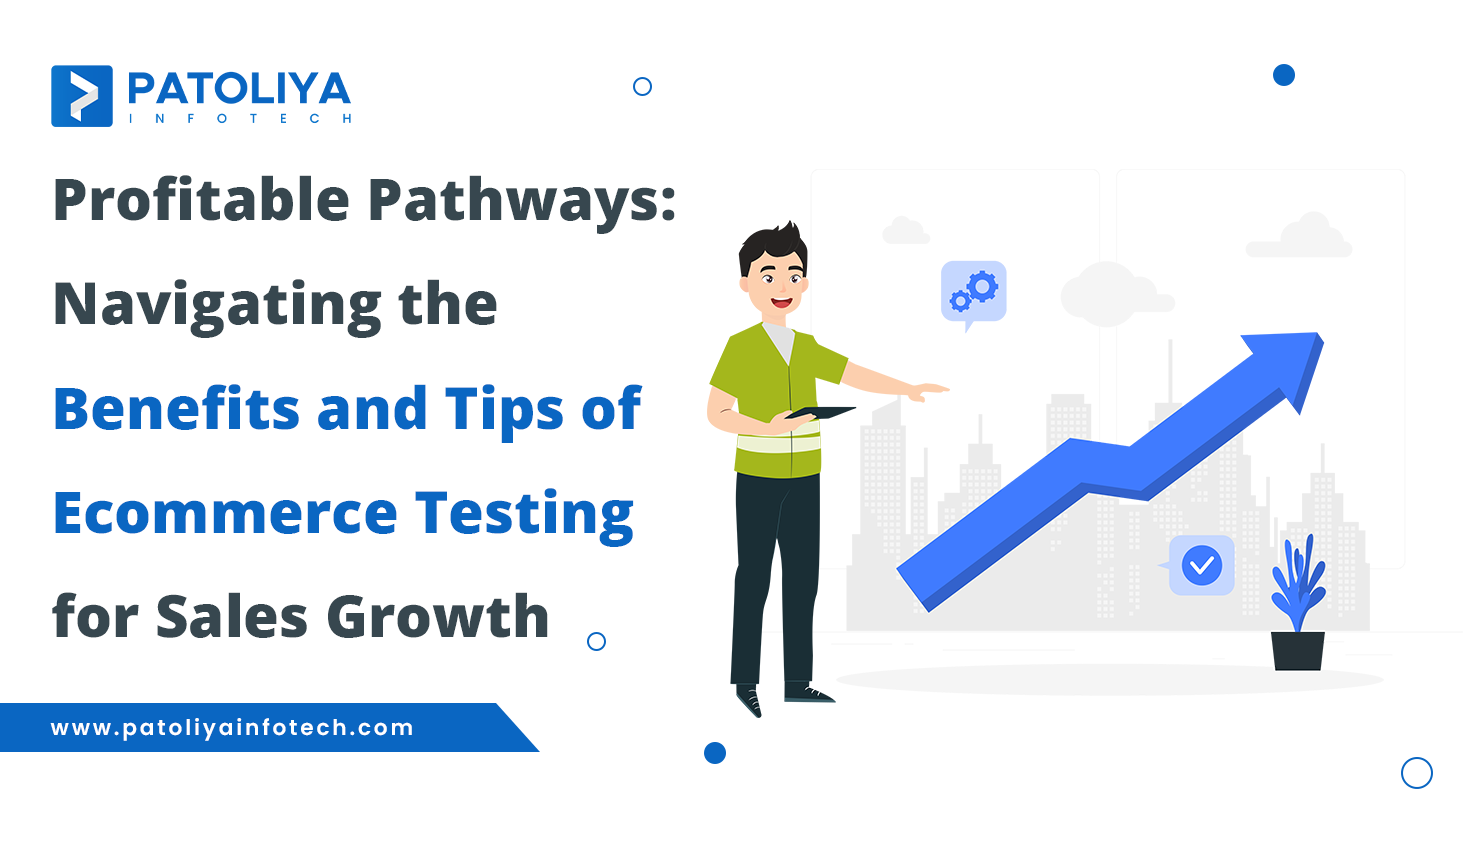 Sales-Driven Strategies: The Power of Ecommerce Testing and Tips for Success